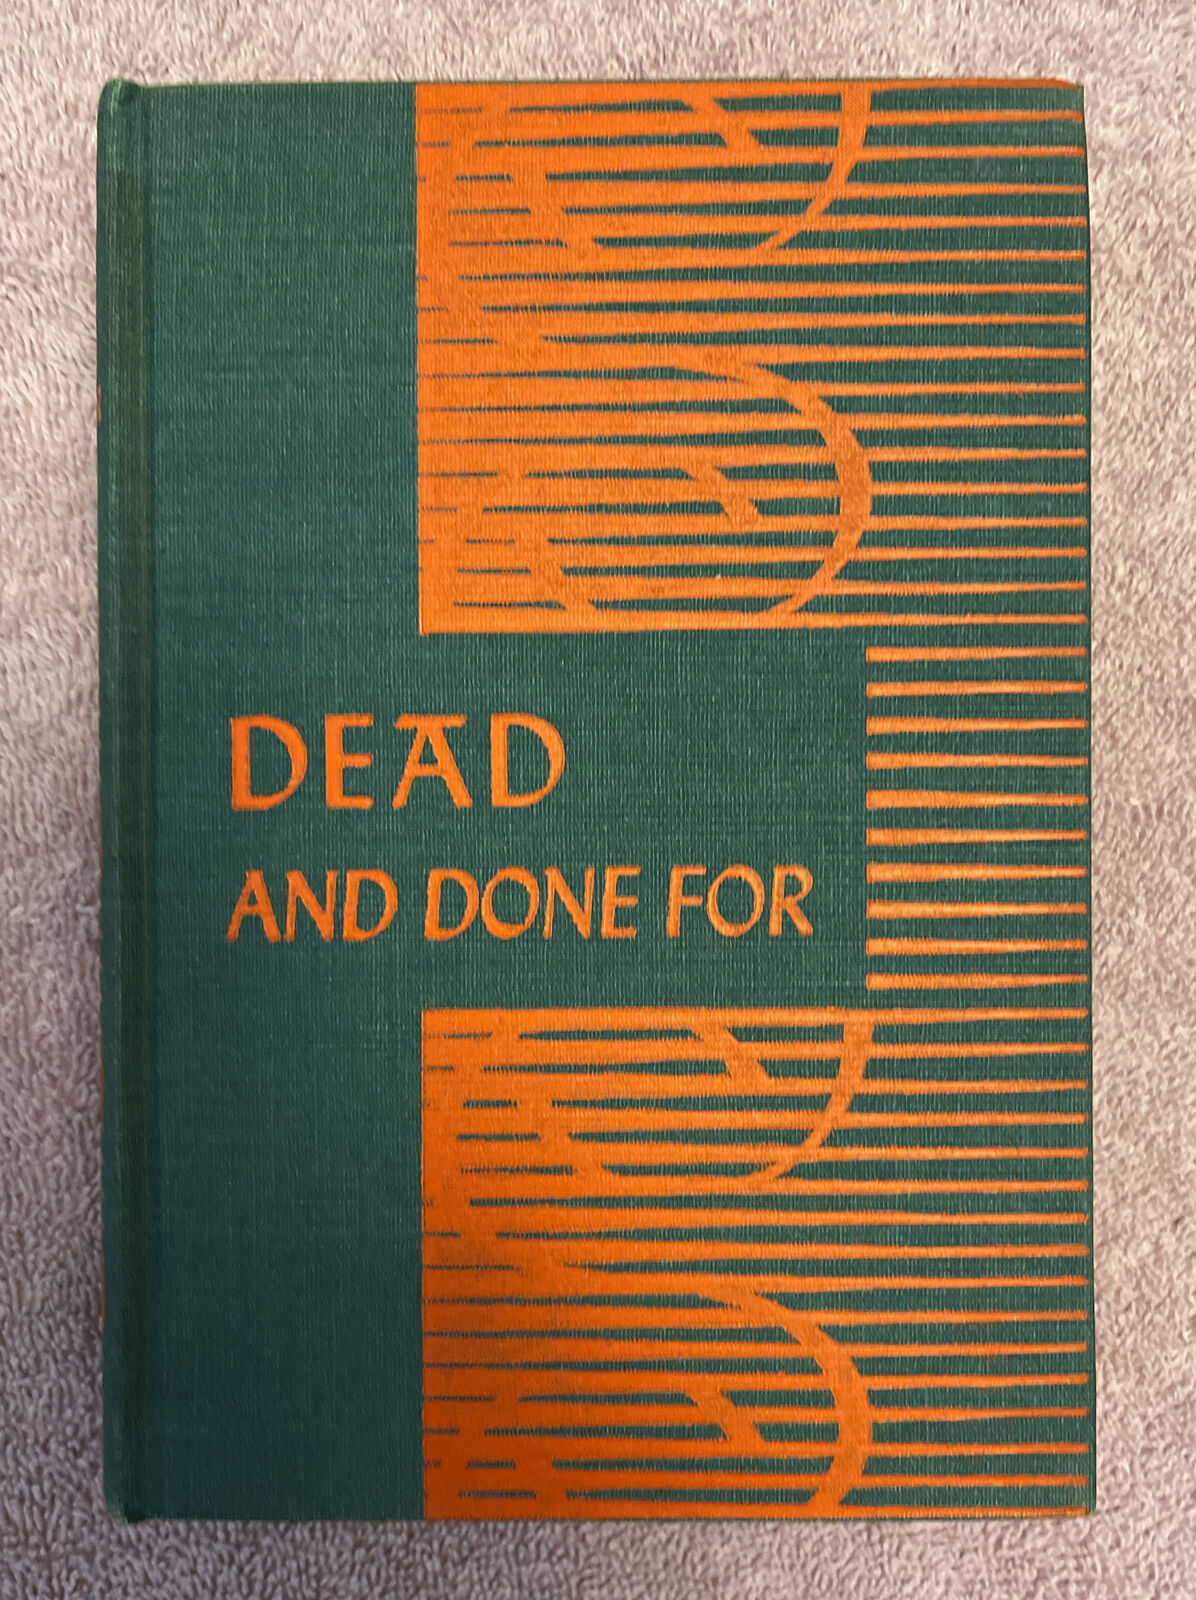 Robert Reeves DEAD AND DONE FOR - 1st ed. (1939) PULP LEGEND - RARE & SHARP COPY